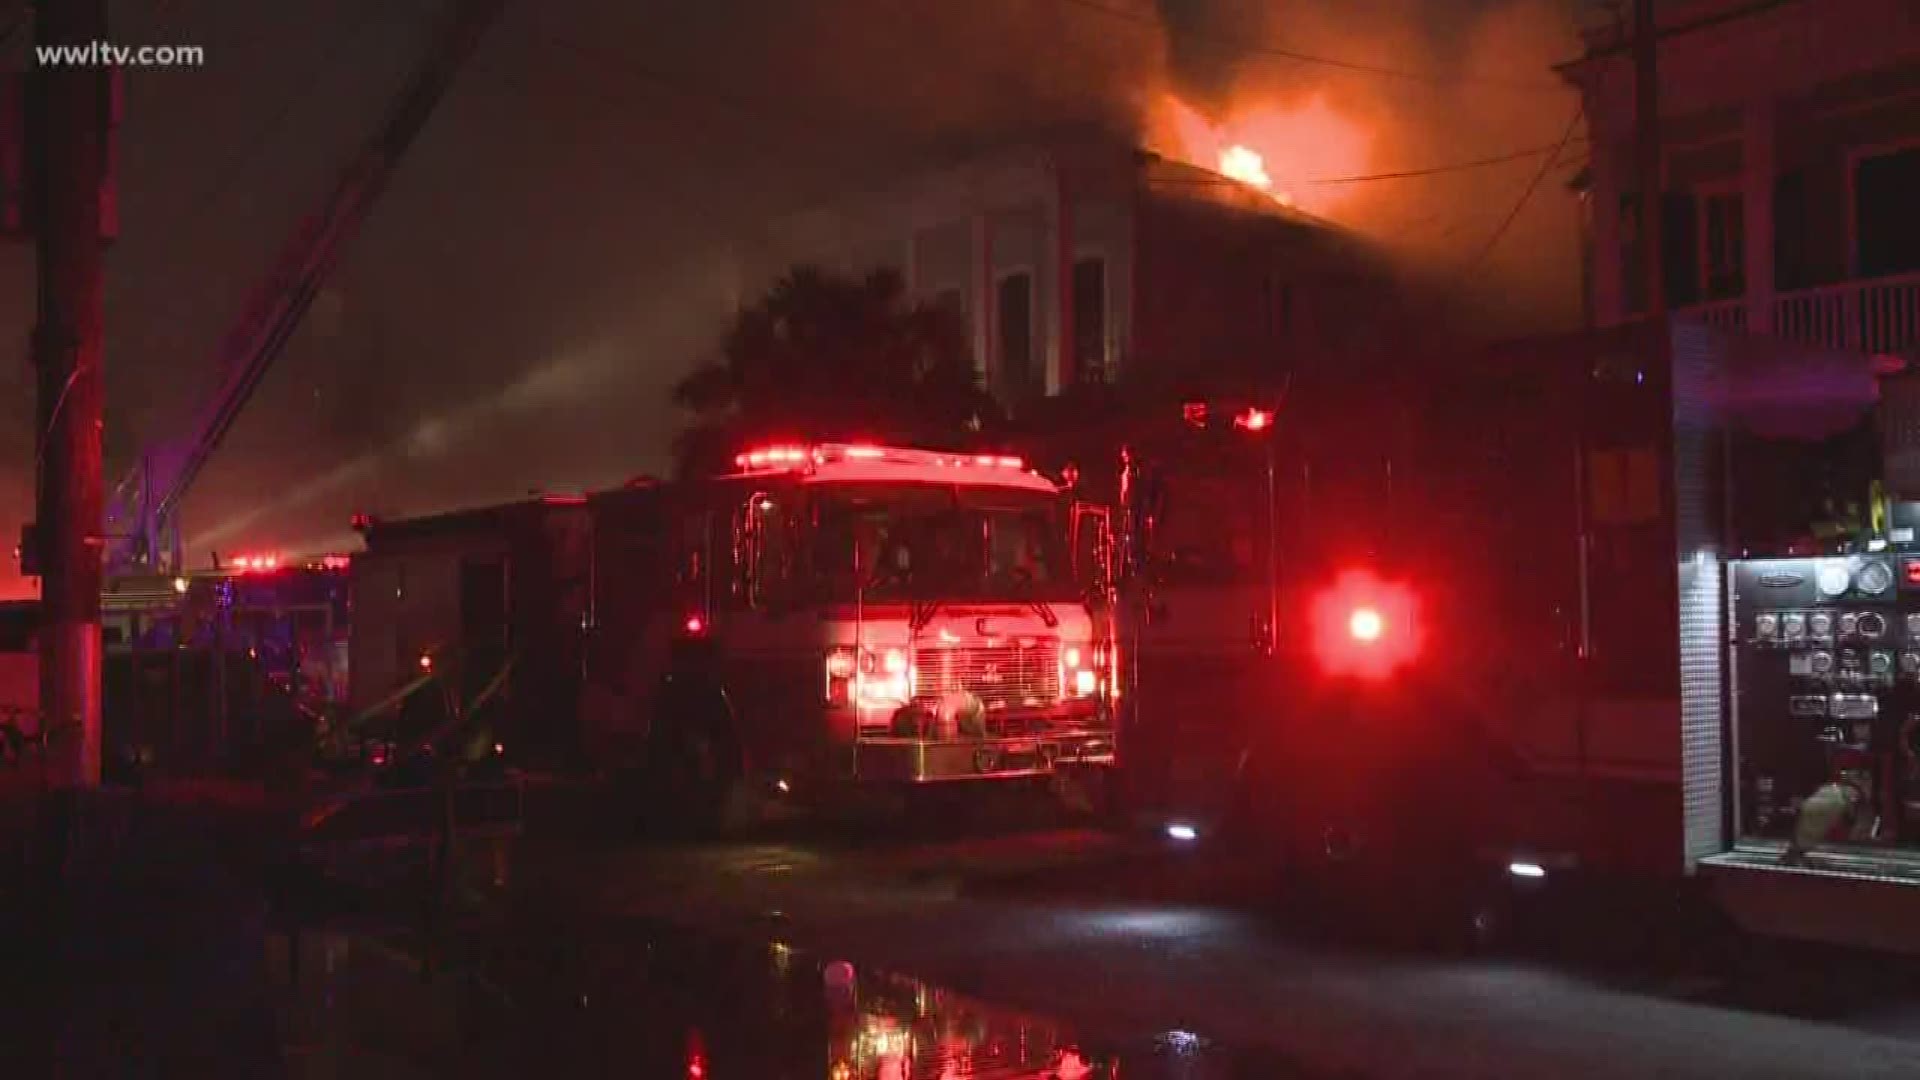 A spokesperson for the New Orleans Fire Department said the fire is in the 1800 block of Baronne Street.